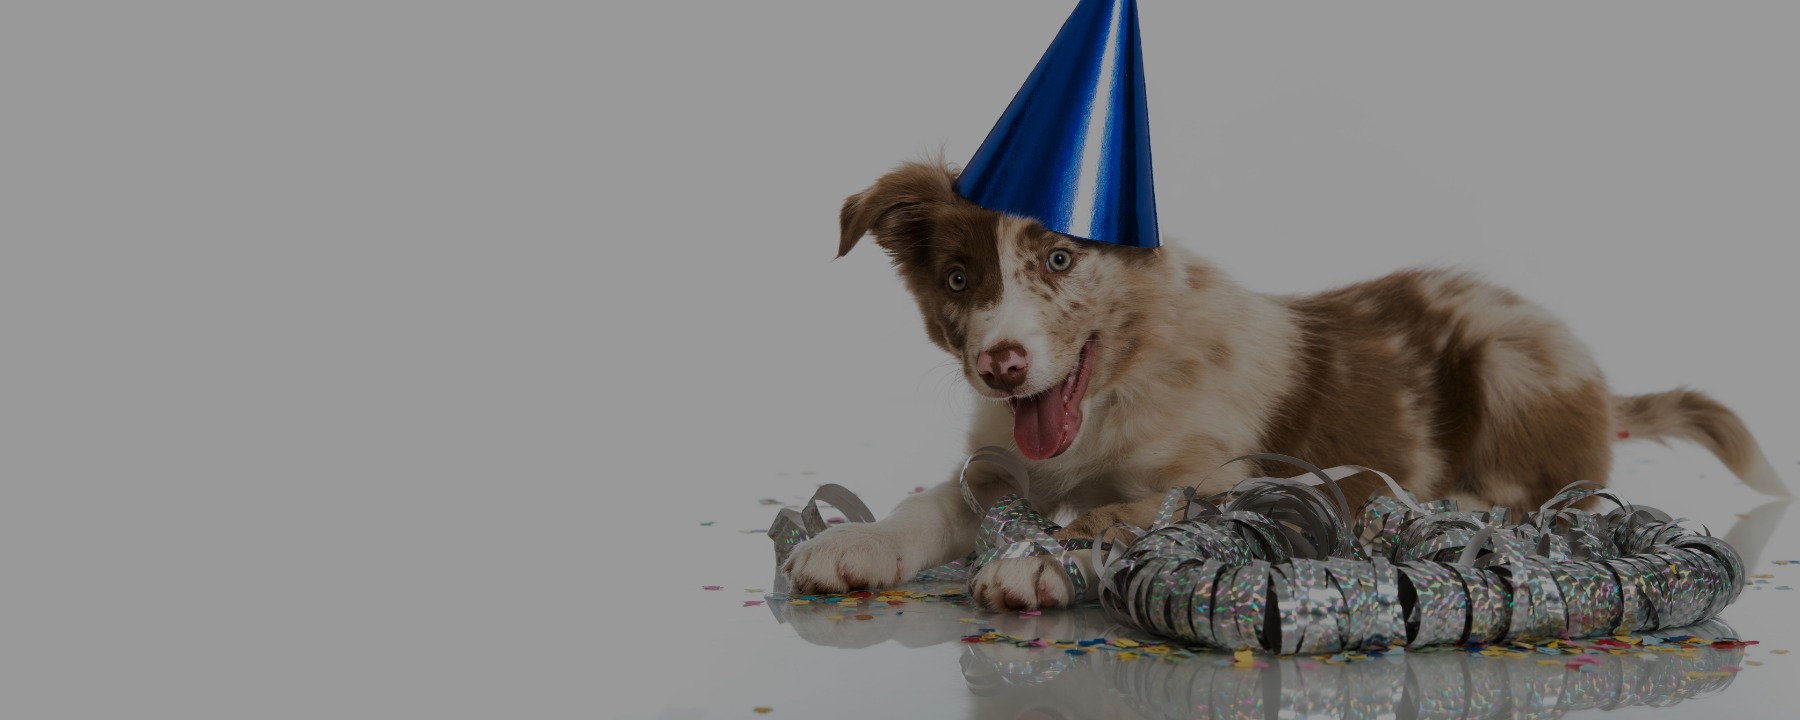 New Year’s Resolutions for Professional Dog Groomers